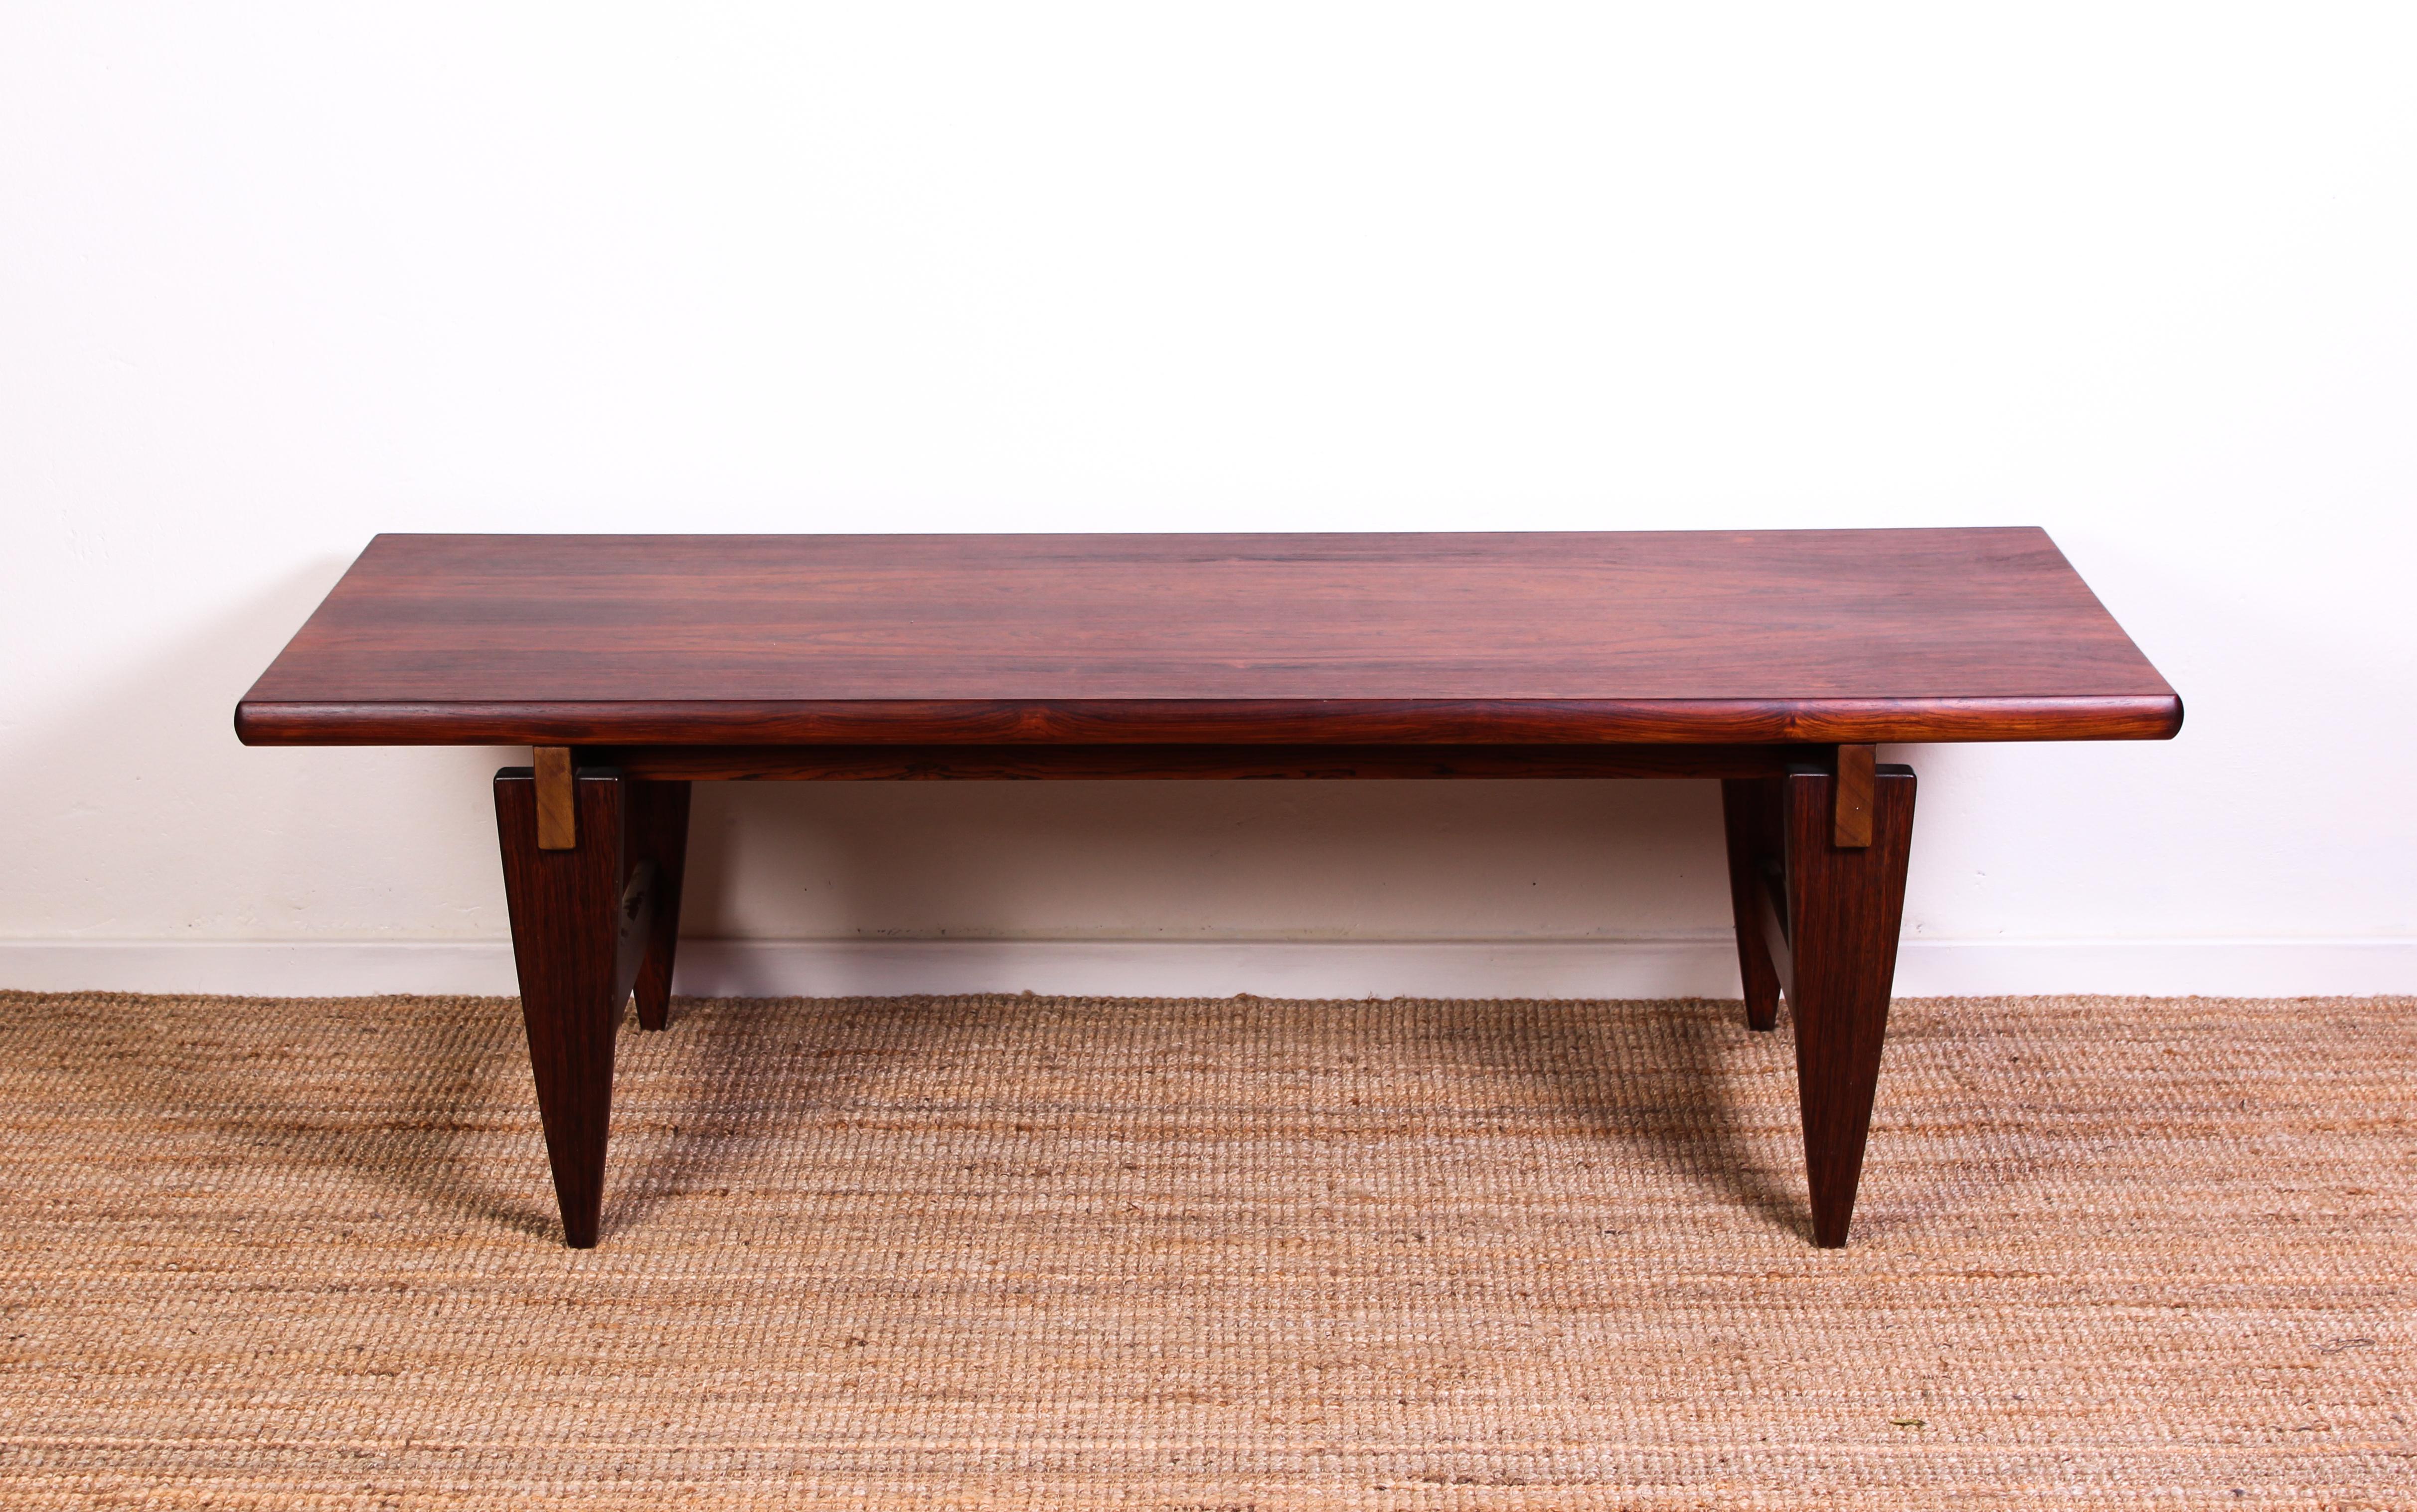 This Mid-Century Modern coffee table made out of rosewood is designed by Danish designer Illum Wikkelsø. The table has been professionally refinished and is in excellent condition. The design combines modern and Brutalist design which makes this a